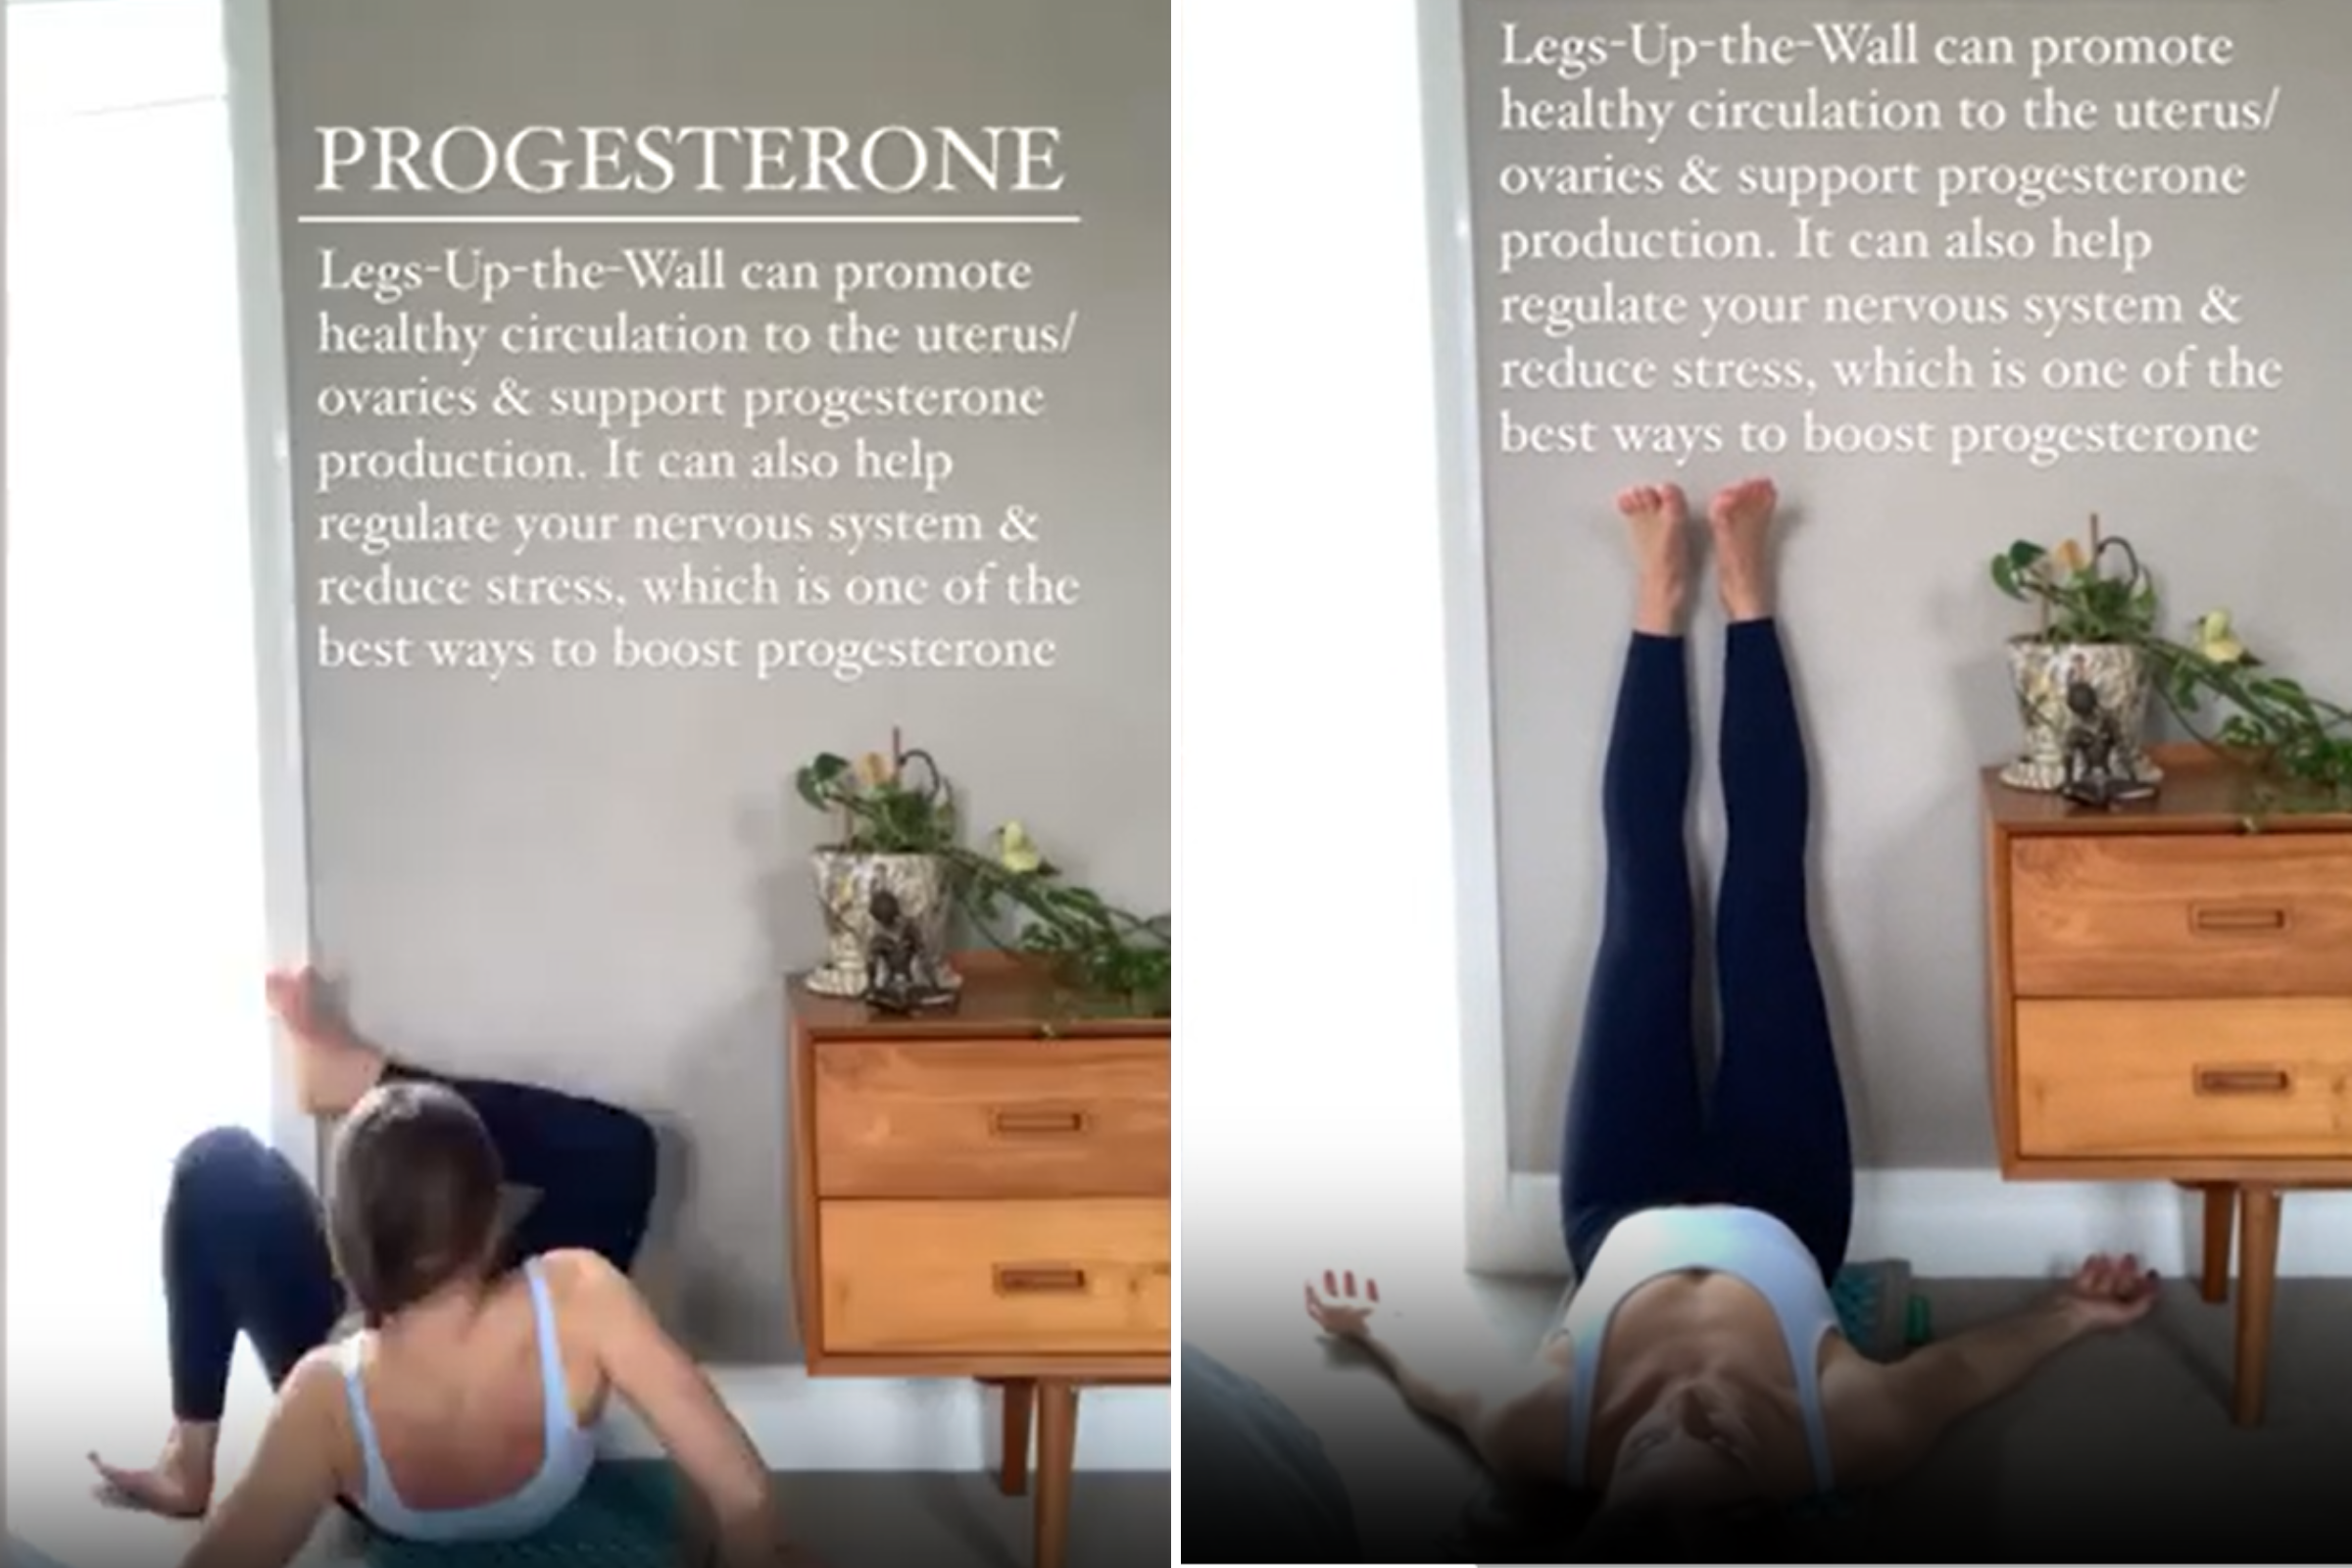 Legs up the Wall: 5 Health Benefits - Yoga with Mikah - Yoga Therapist,  Founder of Lifelong Yoga Online